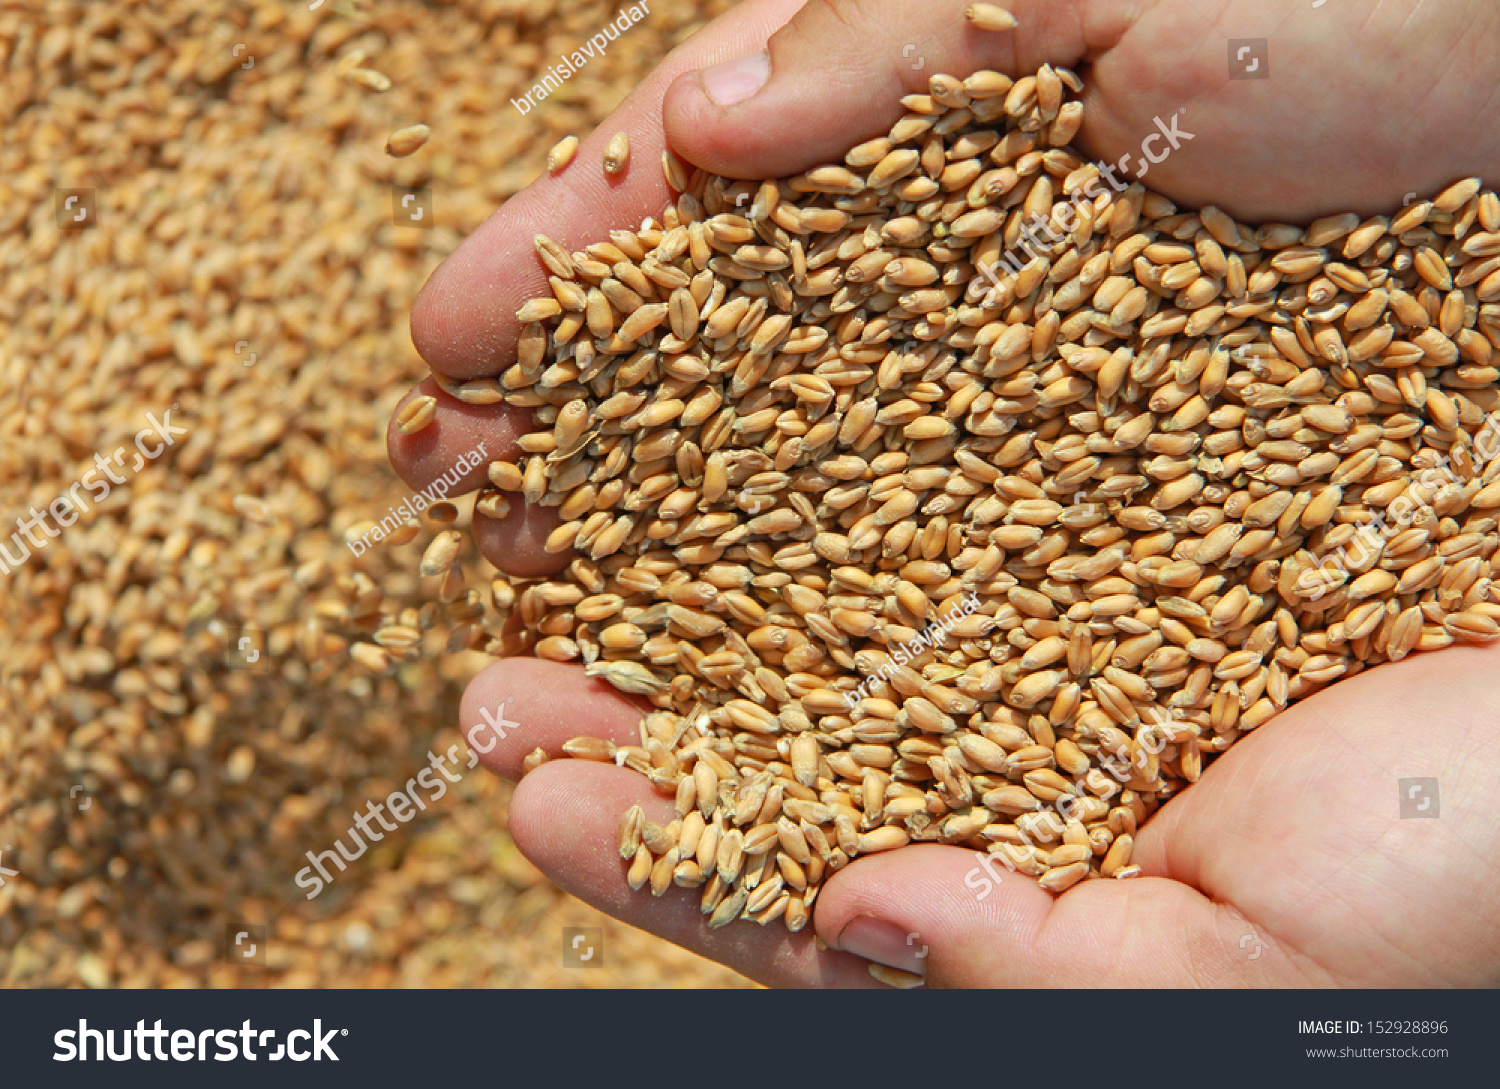 Wheat In A Hand - Good Harvest Stock Photo 152928896 : Shutterstock